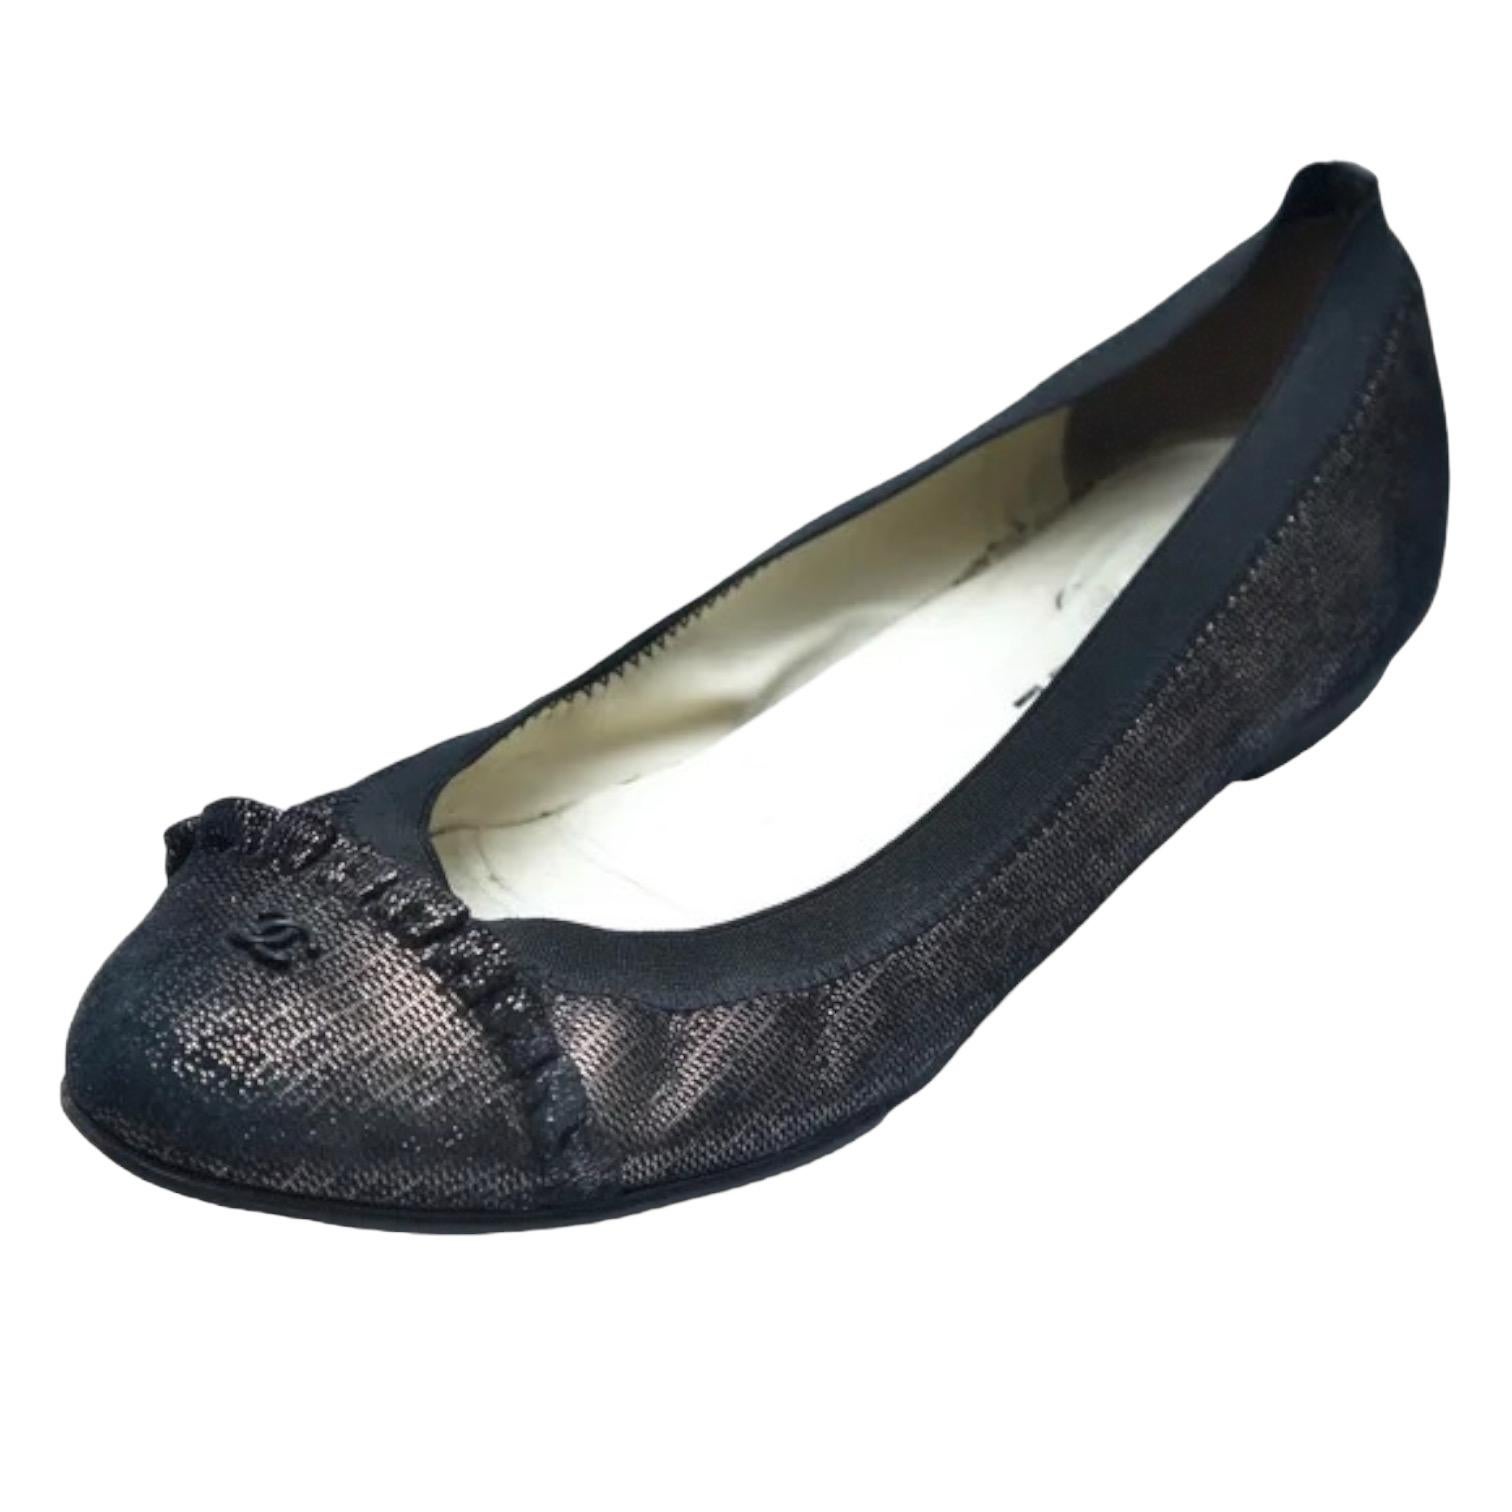 Chanel - Authenticated Ballet Flats - Suede Black Plain for Women, Very Good Condition